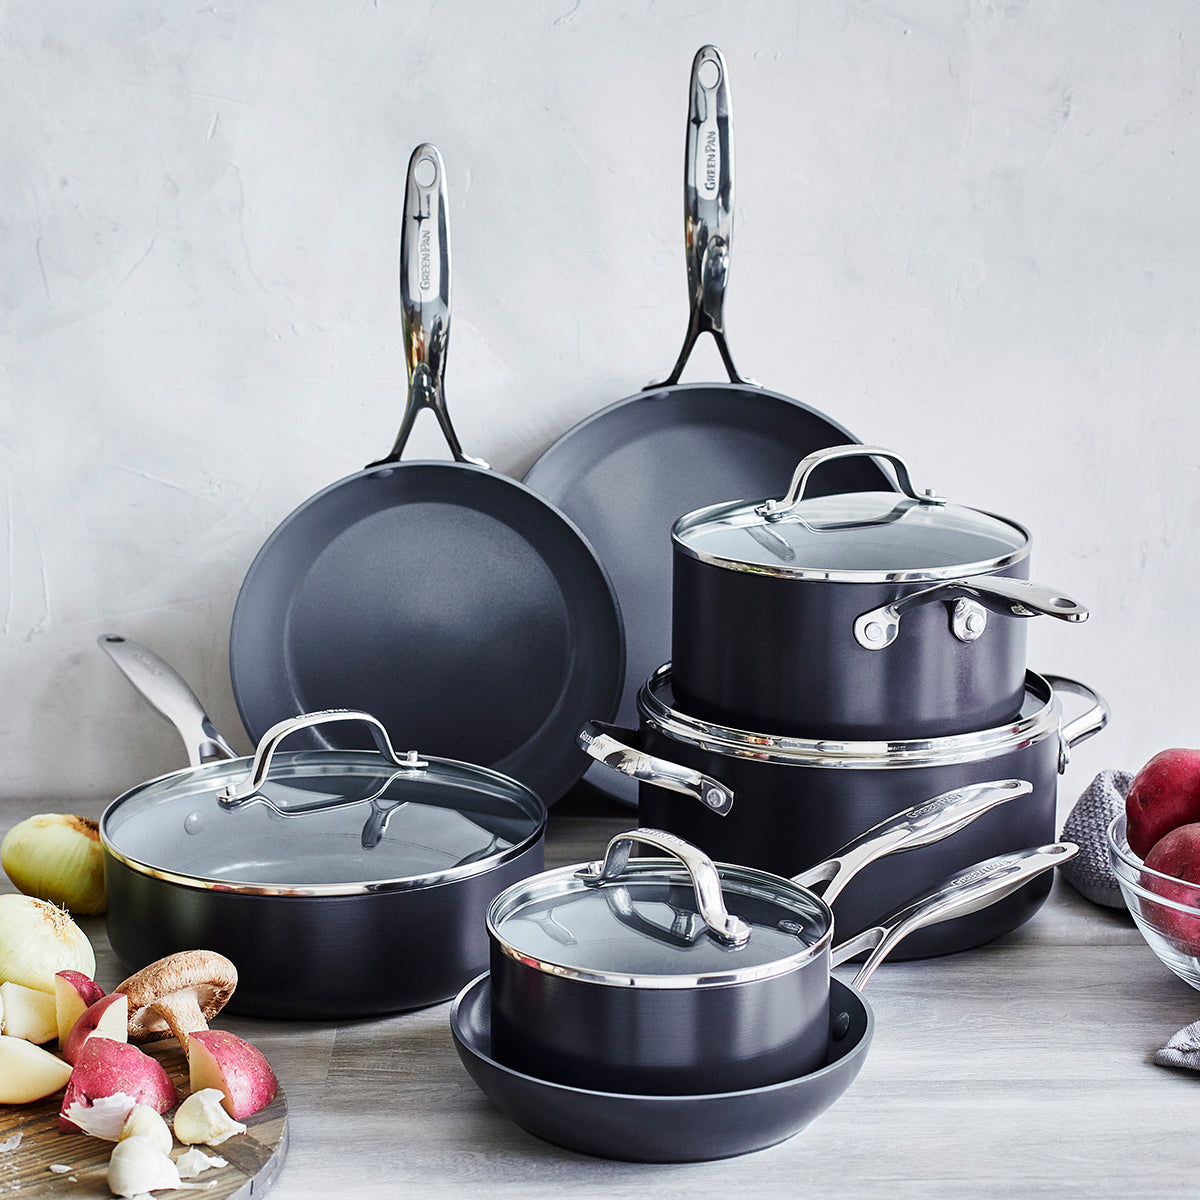 cookware arranged on wooden countertop with light grey background.